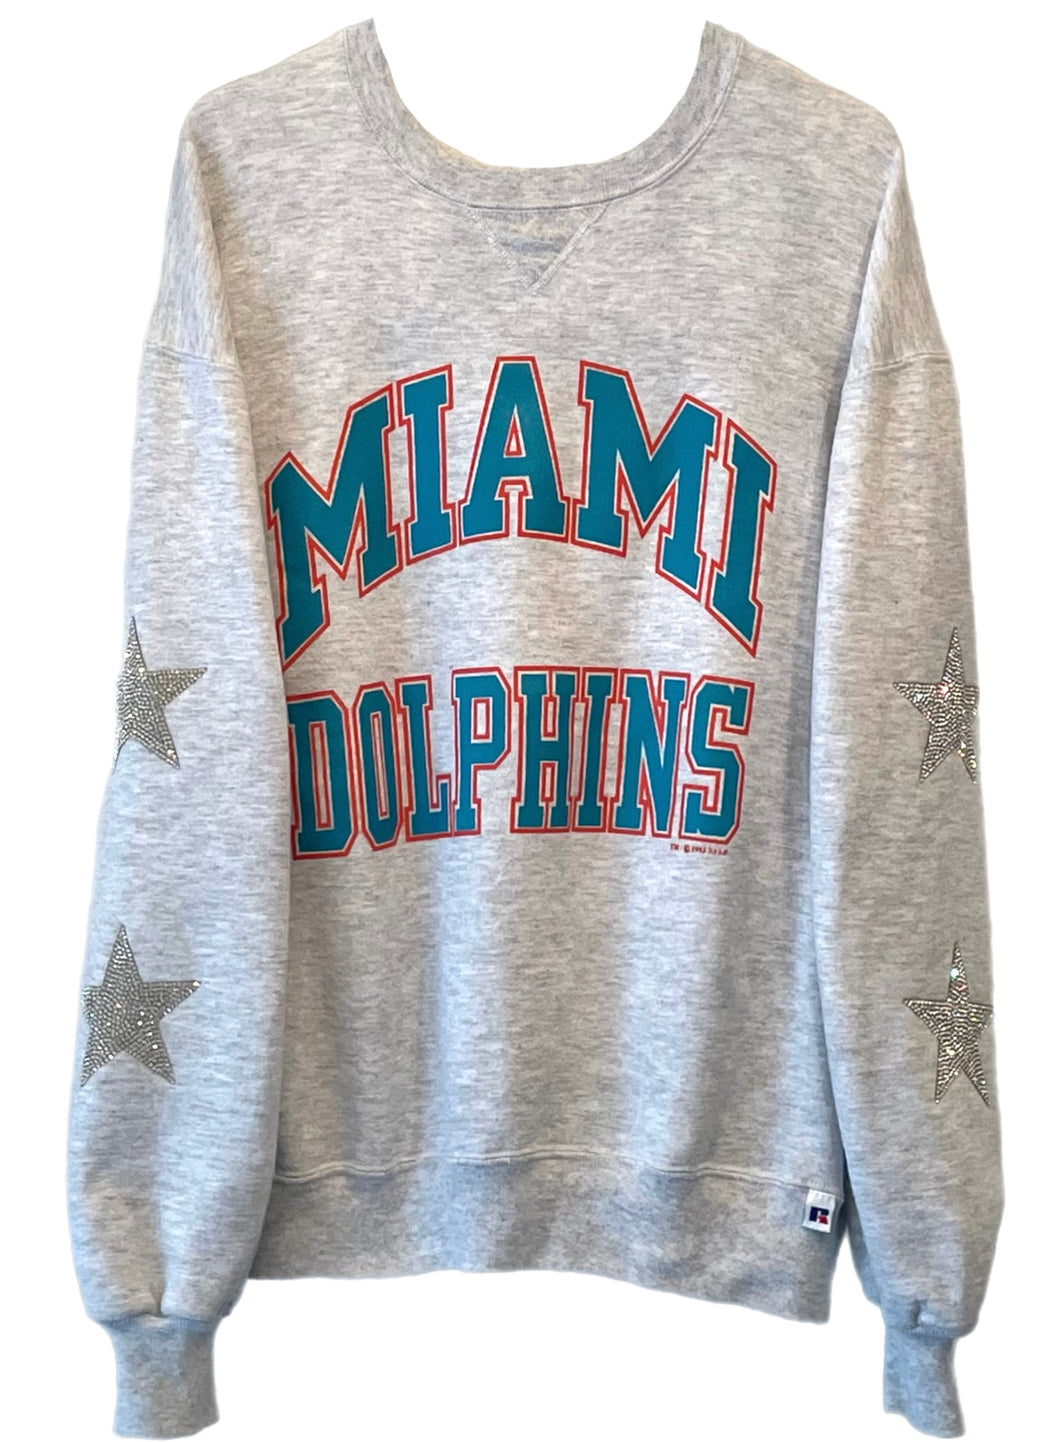 Miami Dolphins, NFL One of a KIND Vintage Sweatshirt with Crystal Star Design